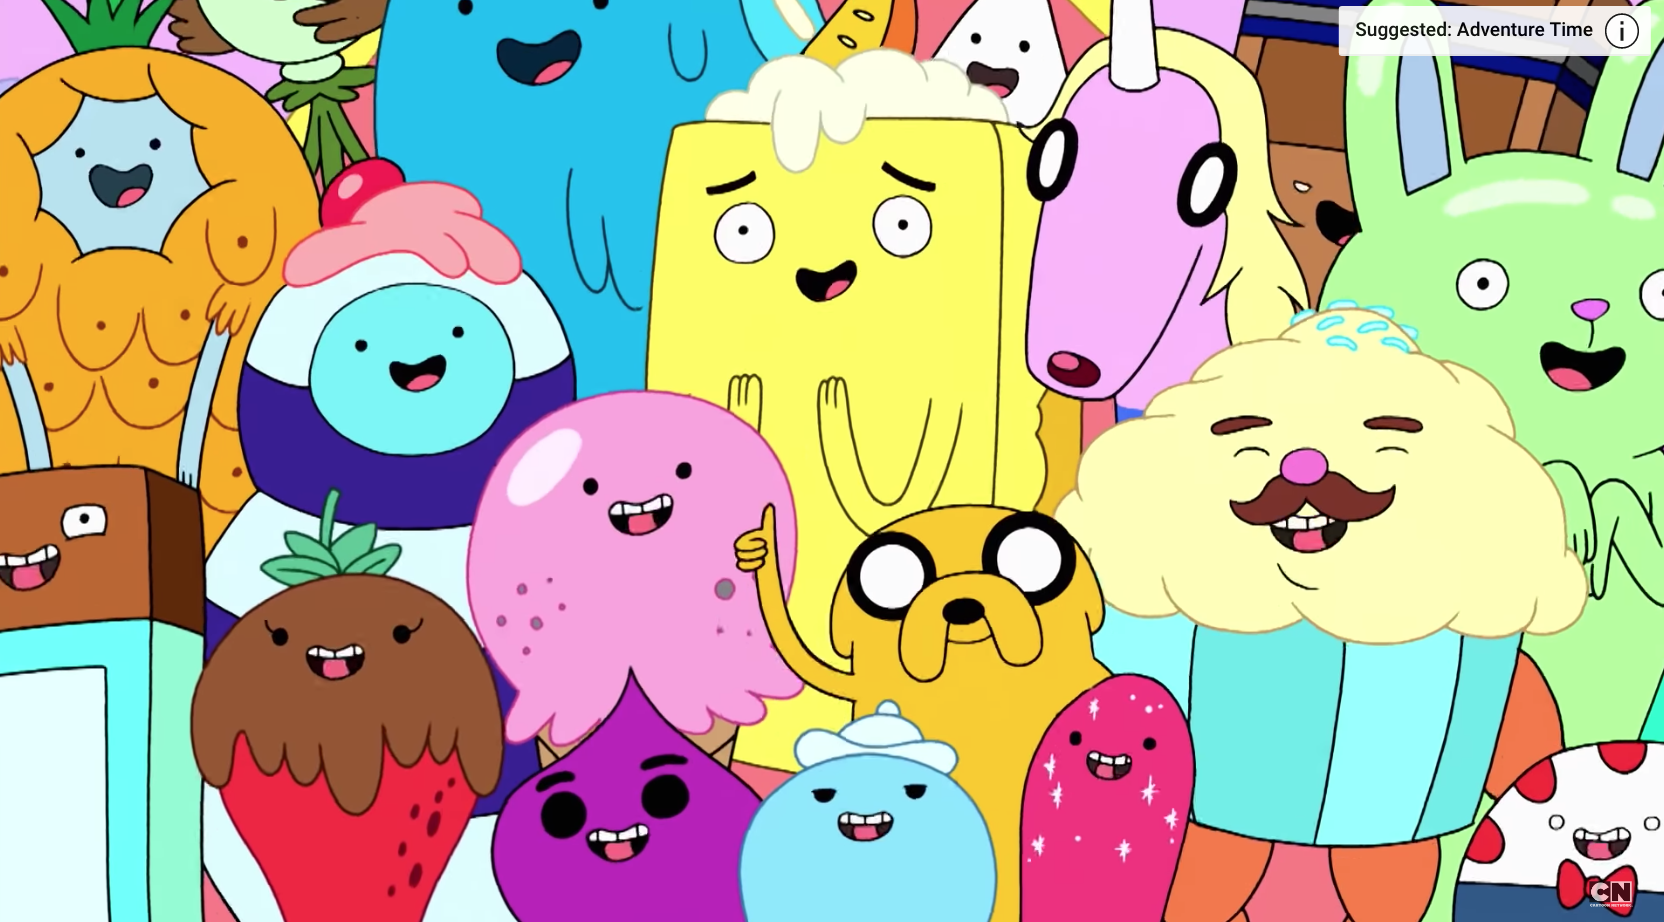 How Adventure Time Became a Global Phenomenon - ELEPHANT